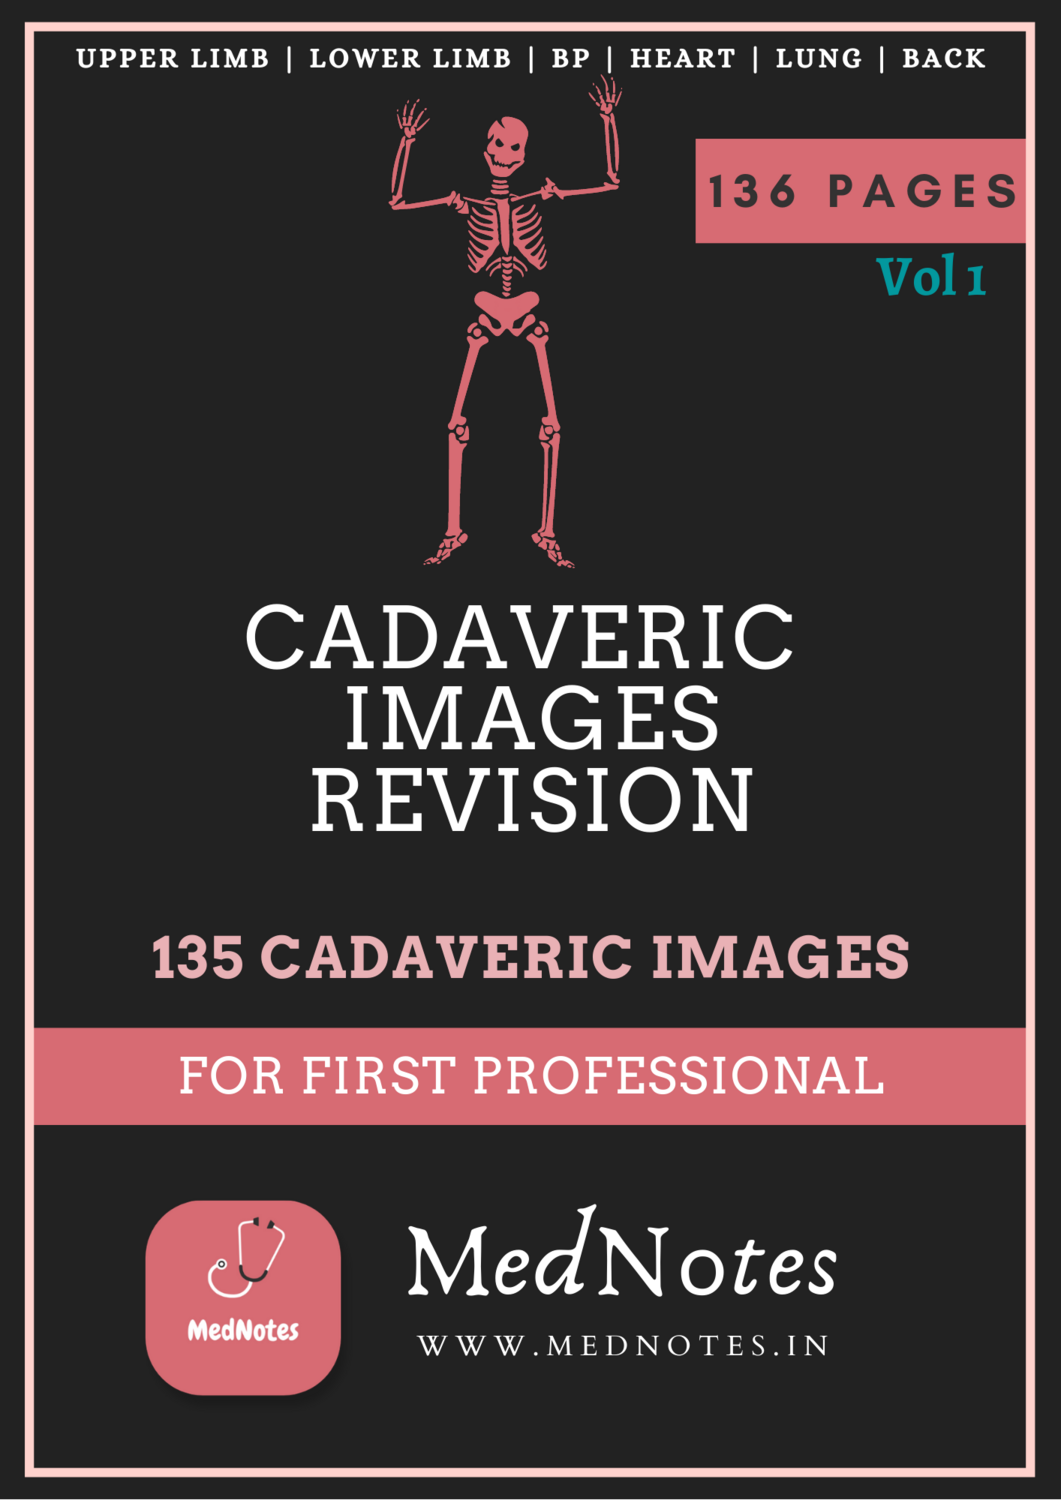 Cadaveric Images Revision (Vol 1) - For First Professional [E book]